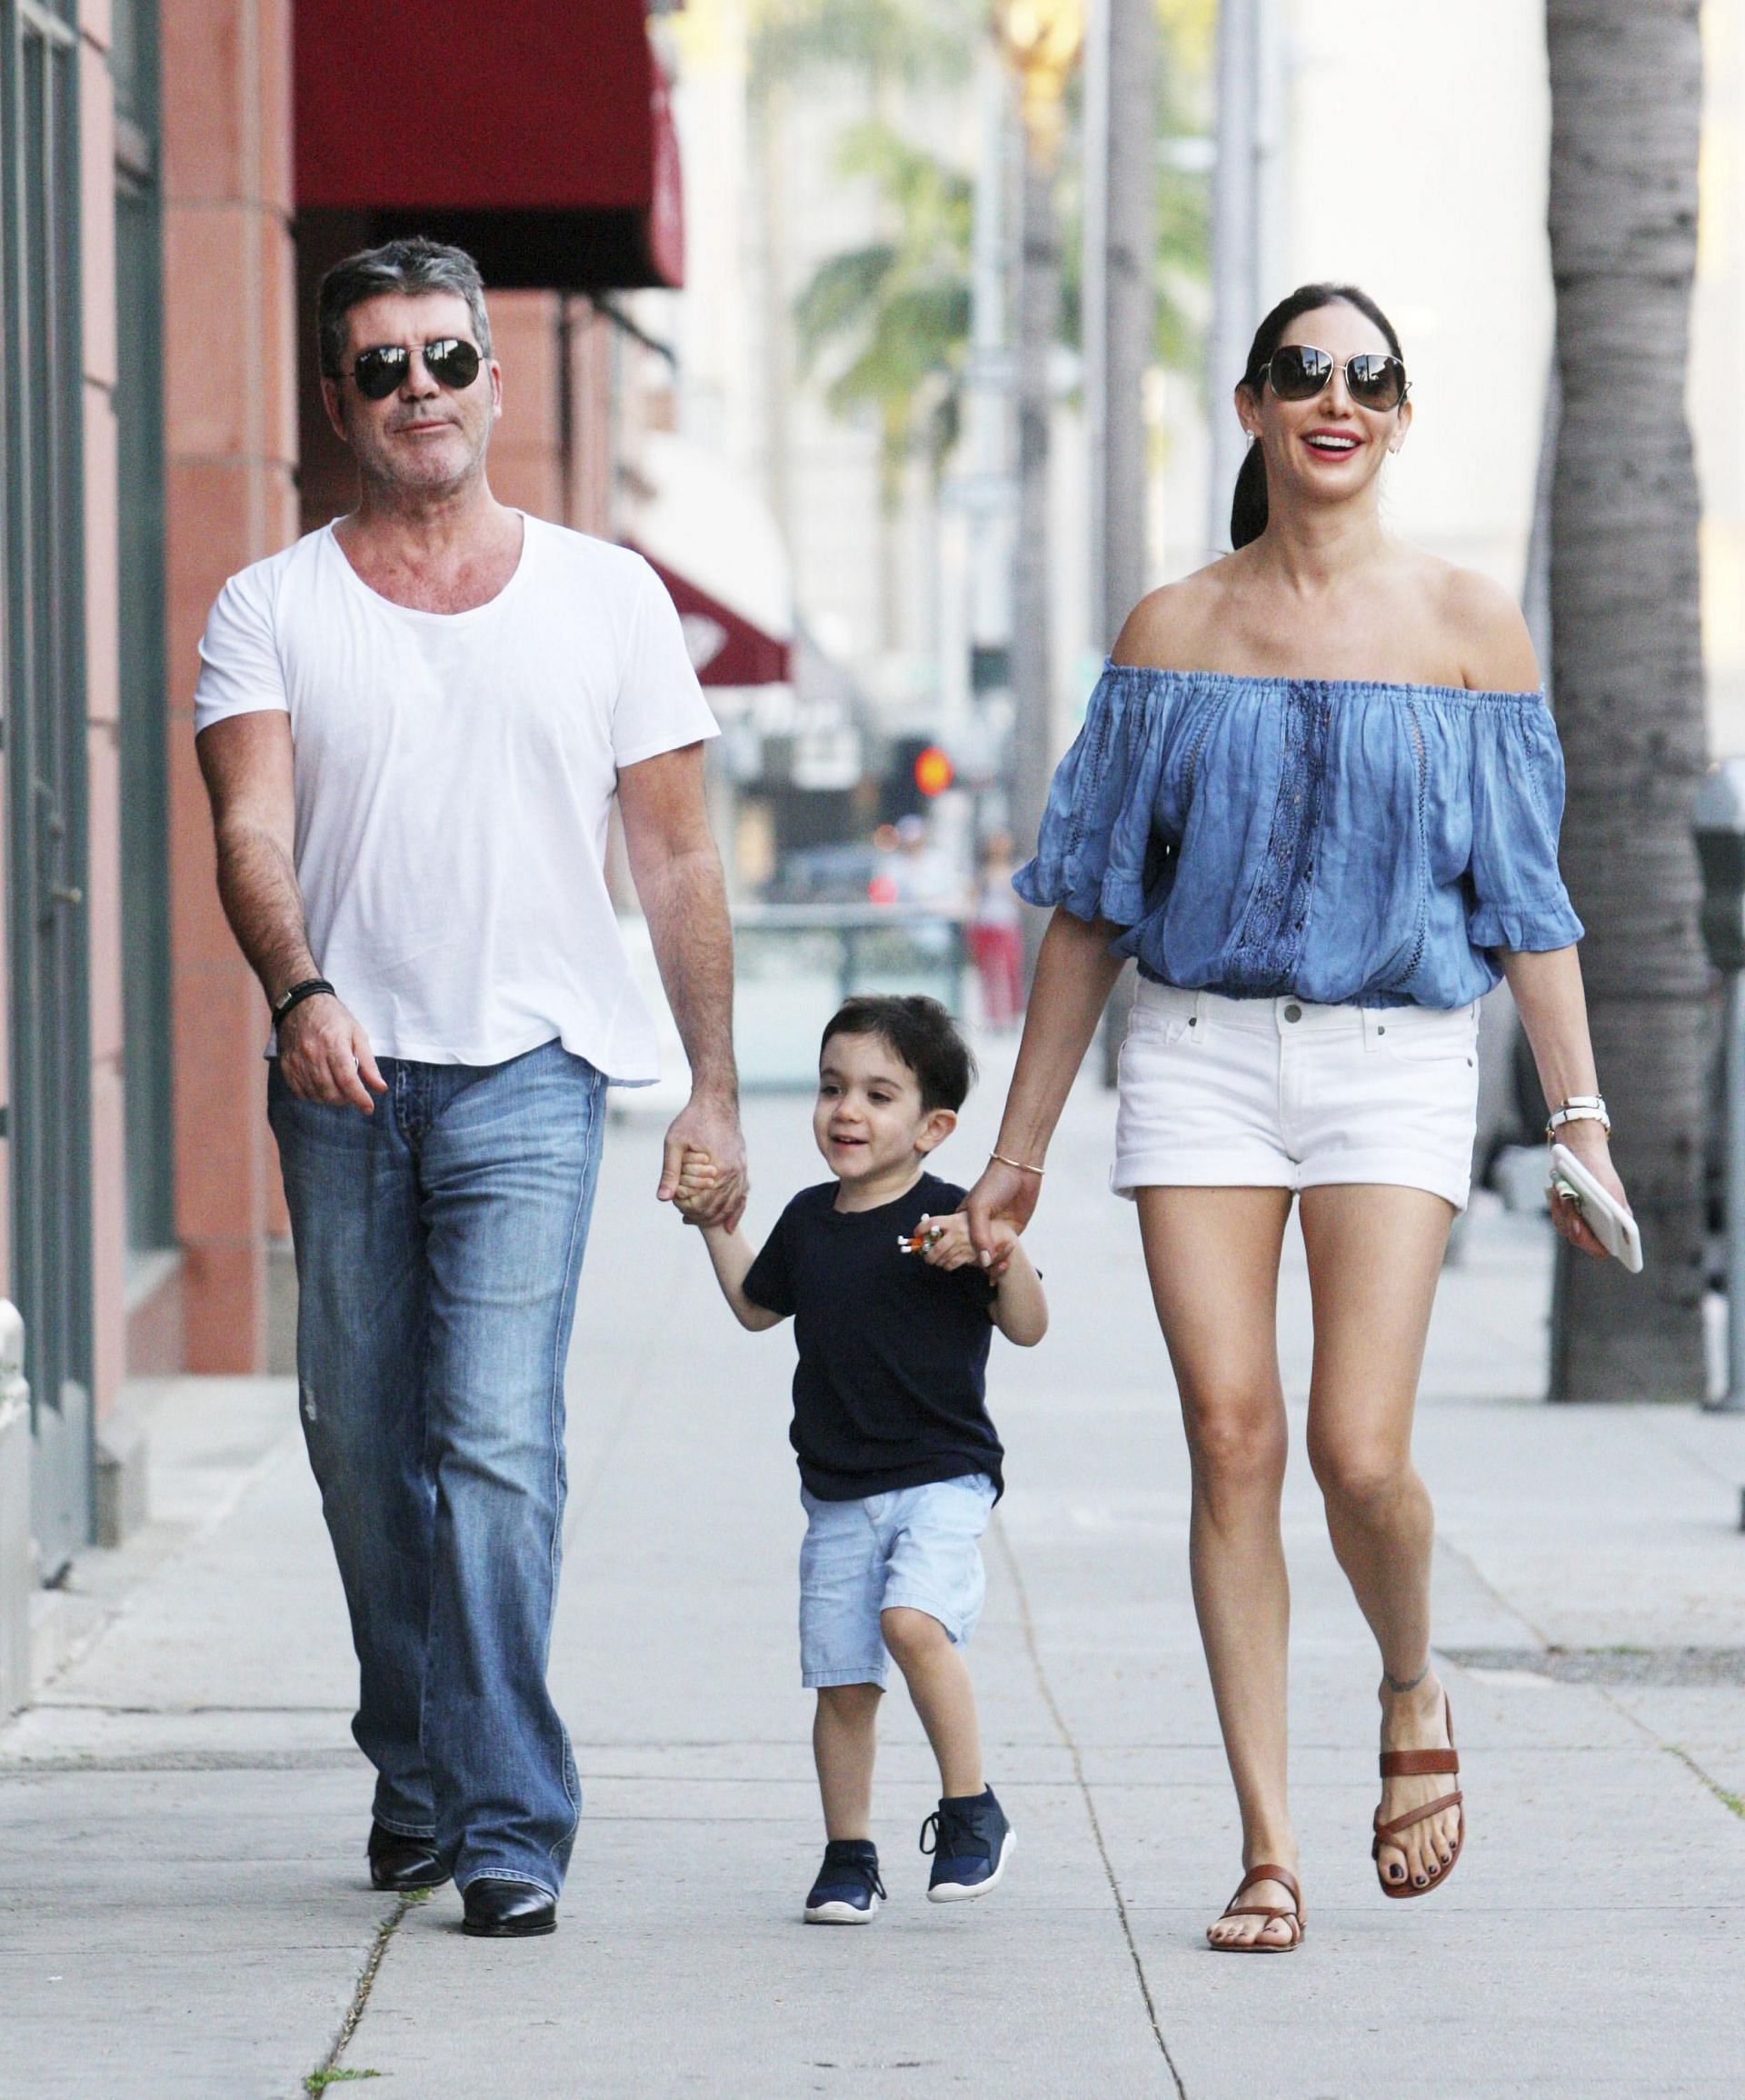 Simon Cowell and his family on the streets of USA in 2017. (Image via Fame Flynet)